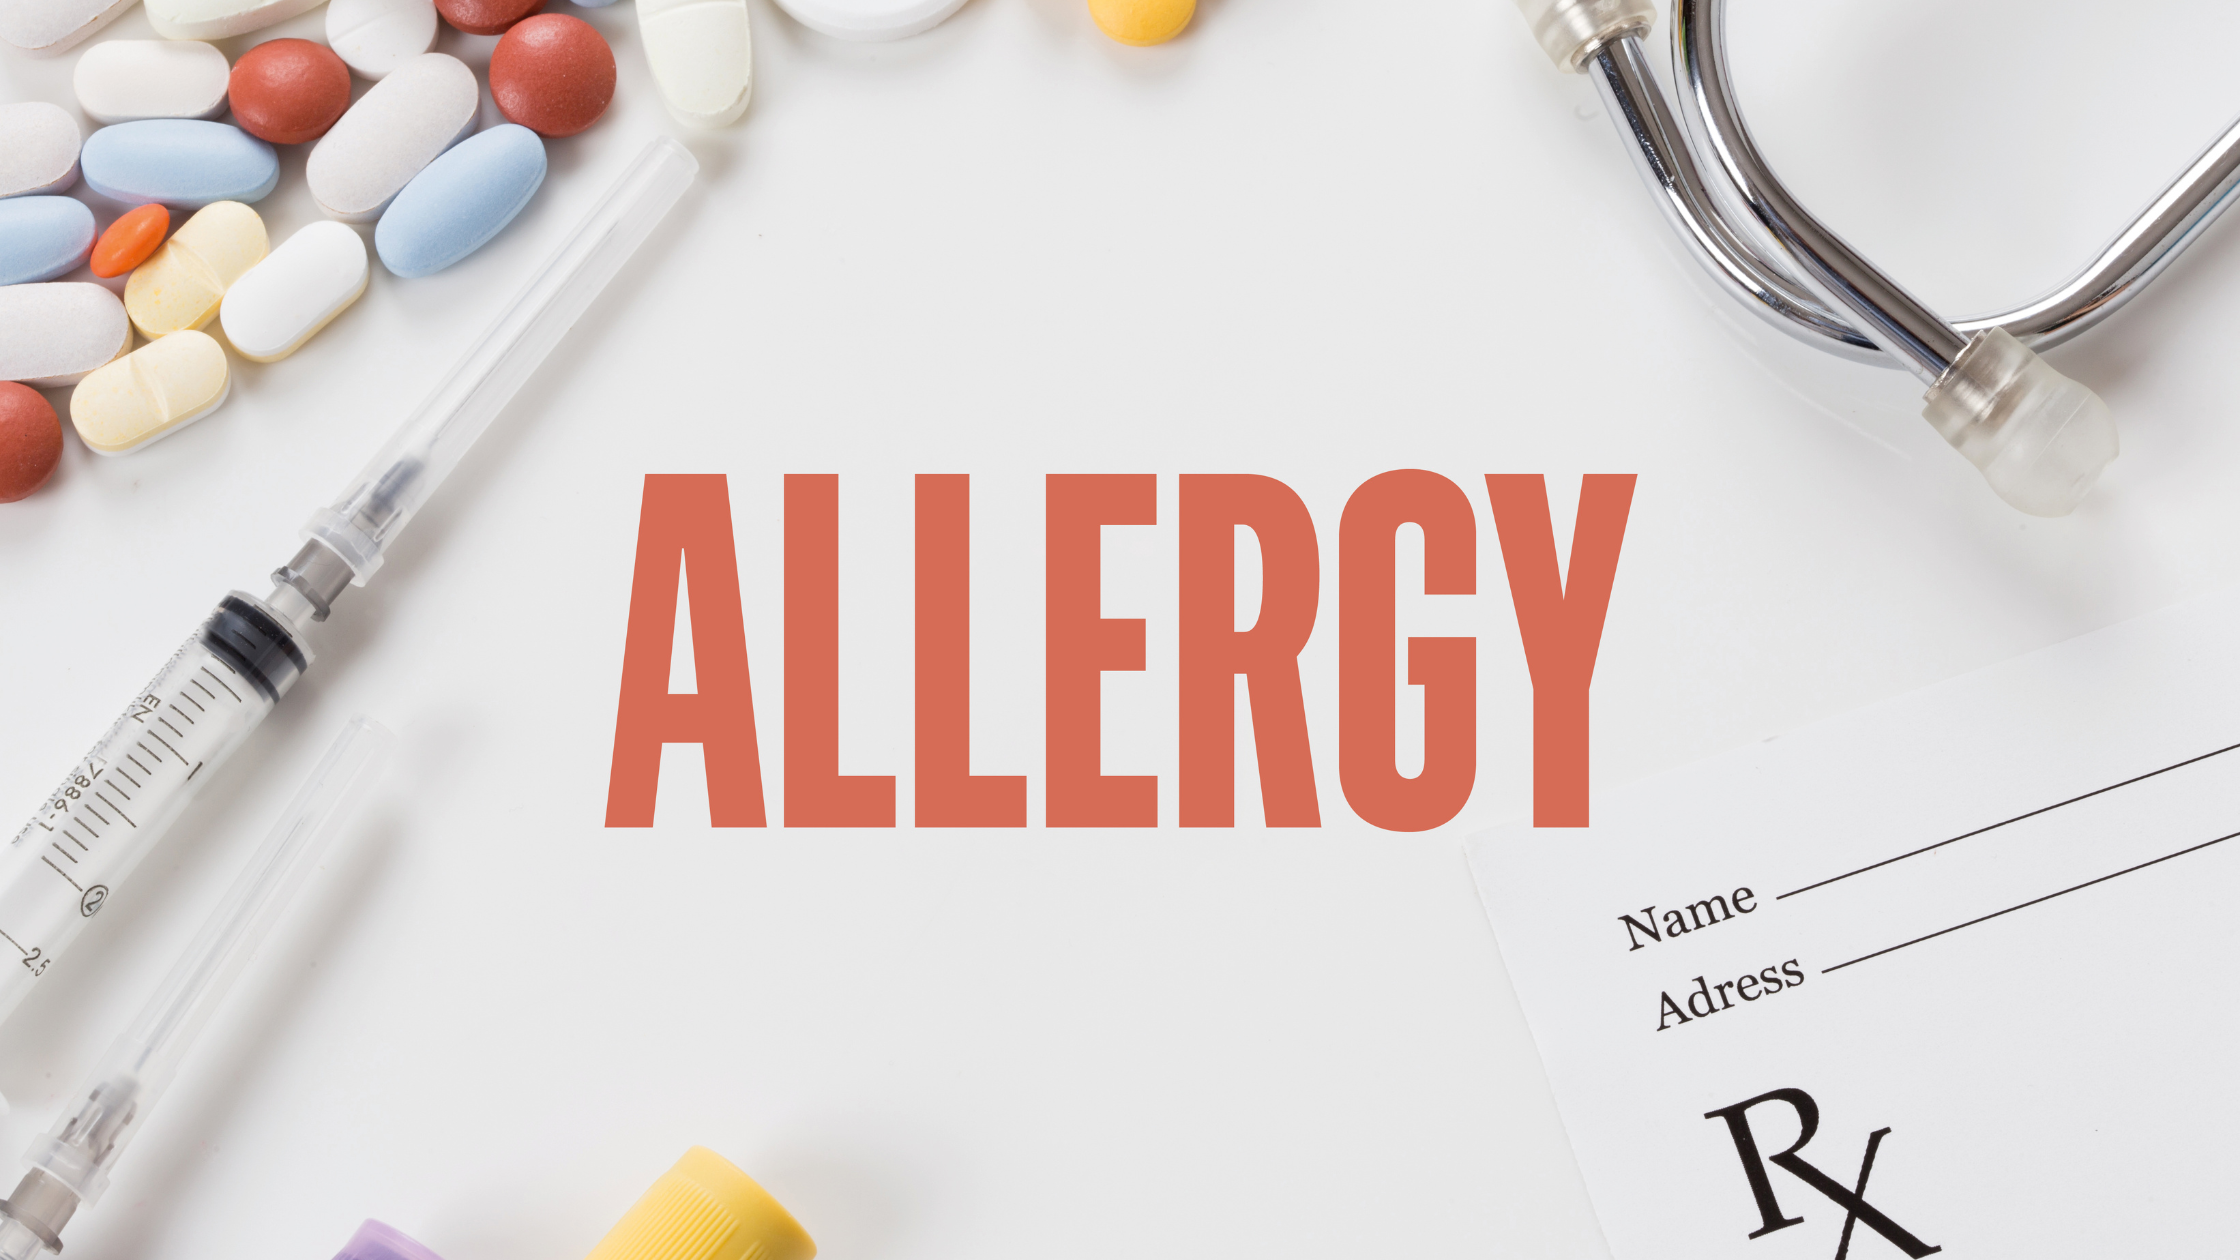 the work "allergy" on a paper surrounded by a stethoscope, pills, and medical syringe